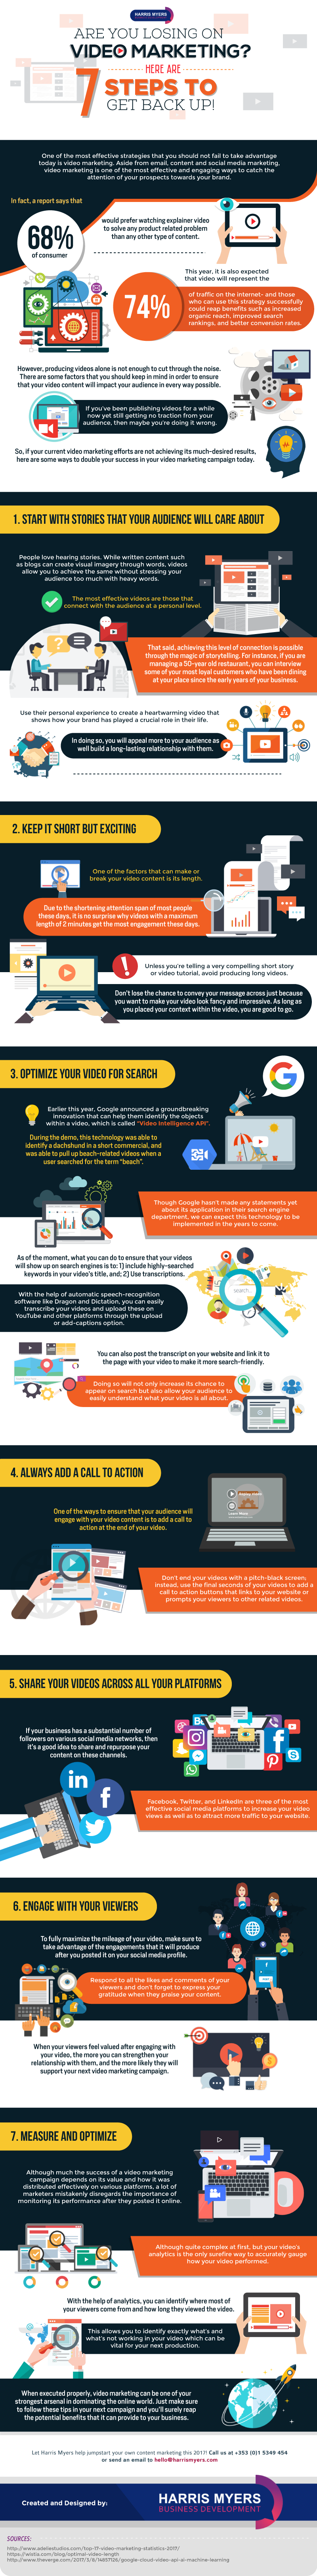 Are You Losing on Video Marketing? Here are 7 Steps to Get Back Up! - #Infographic